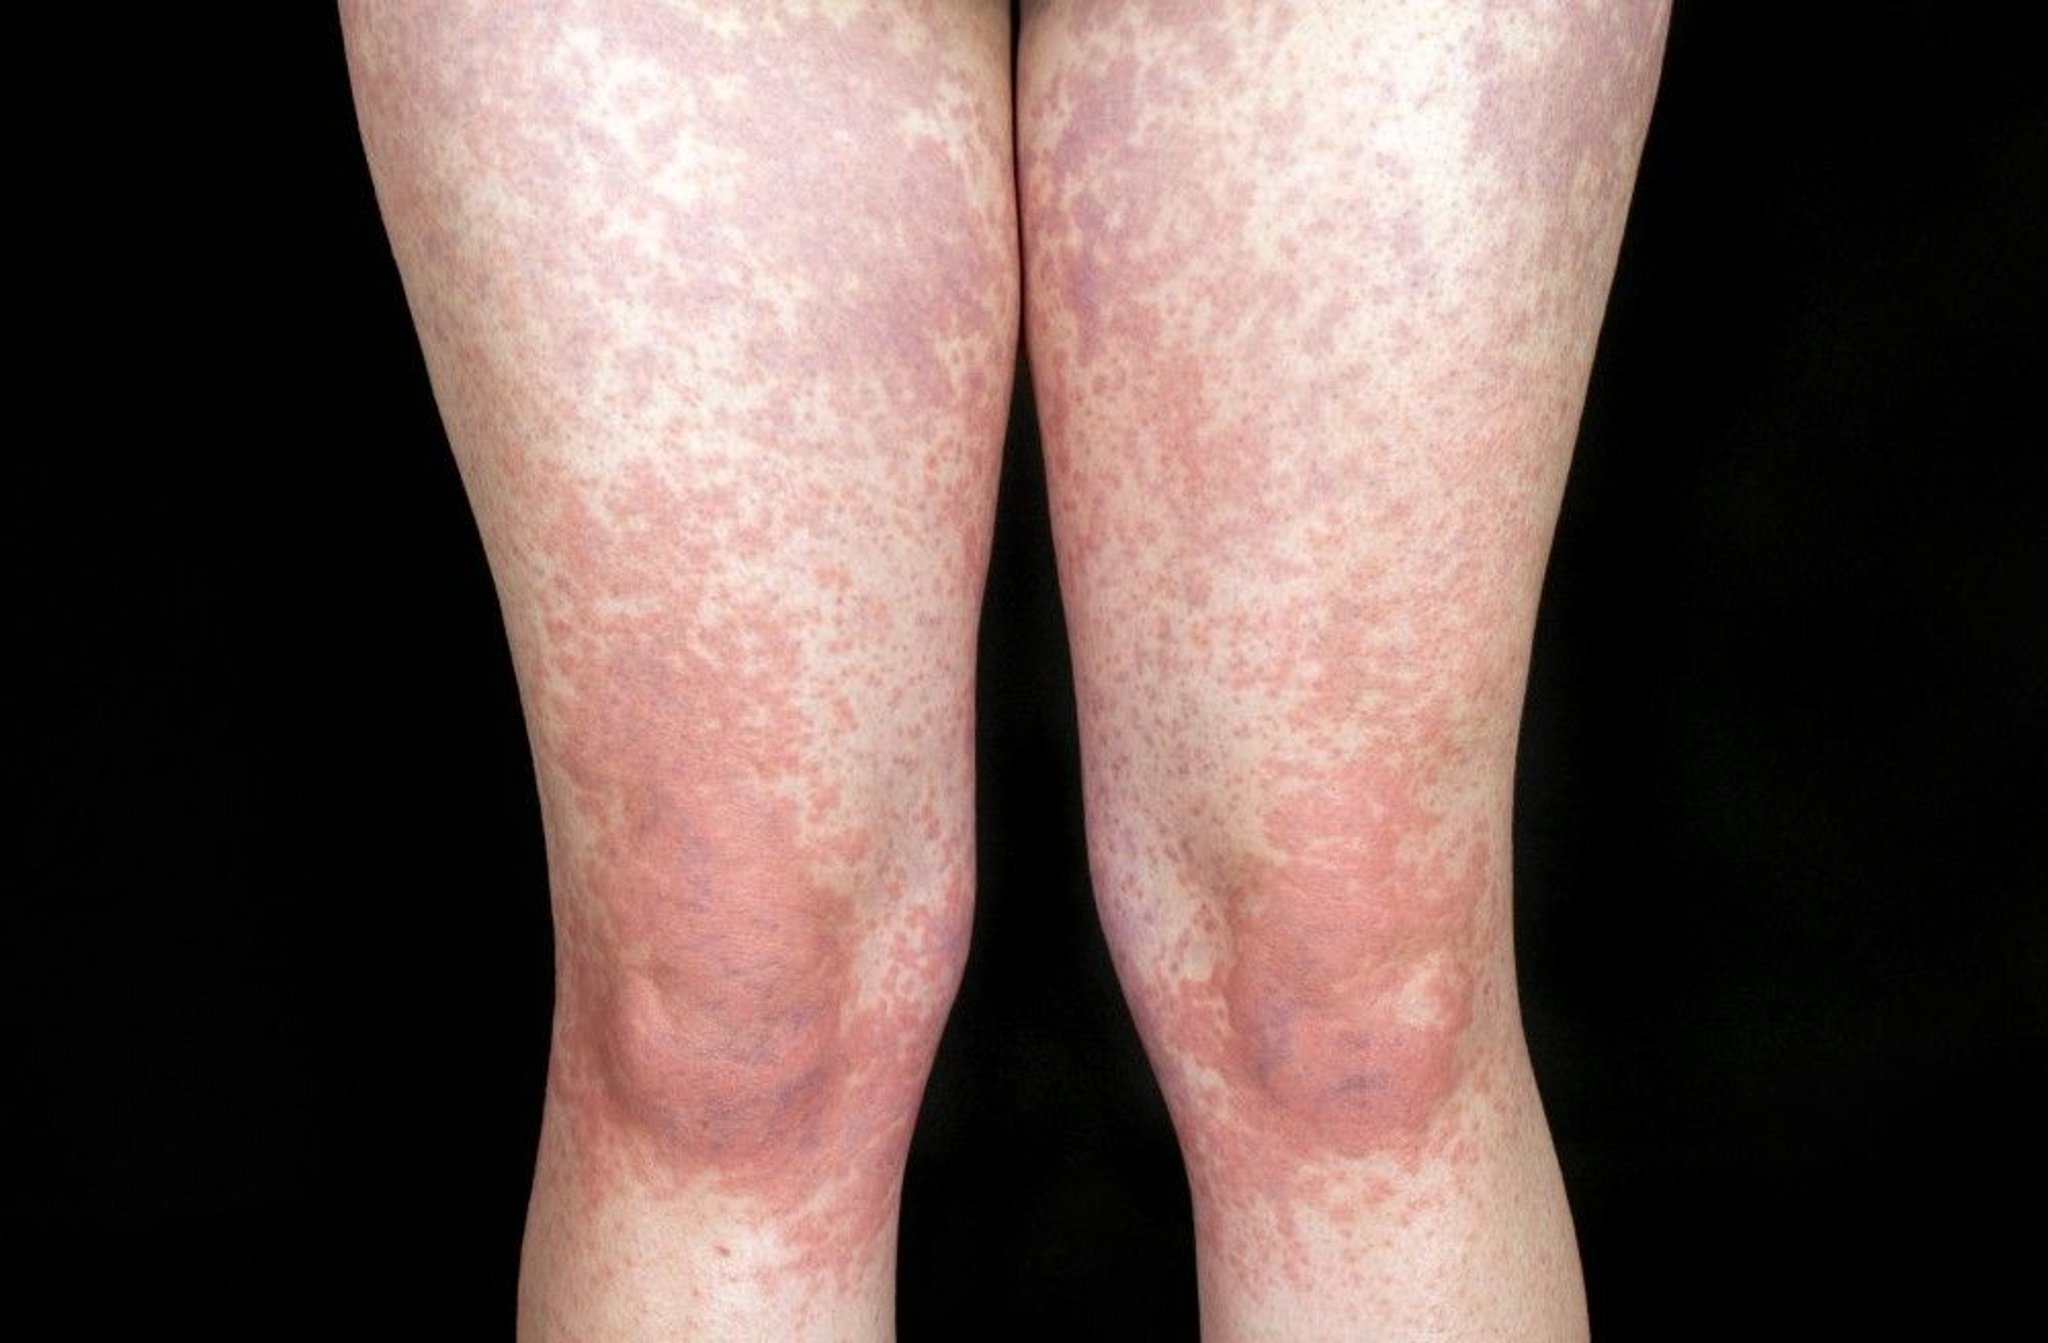 Rash Caused by Infectious Mononucleosis